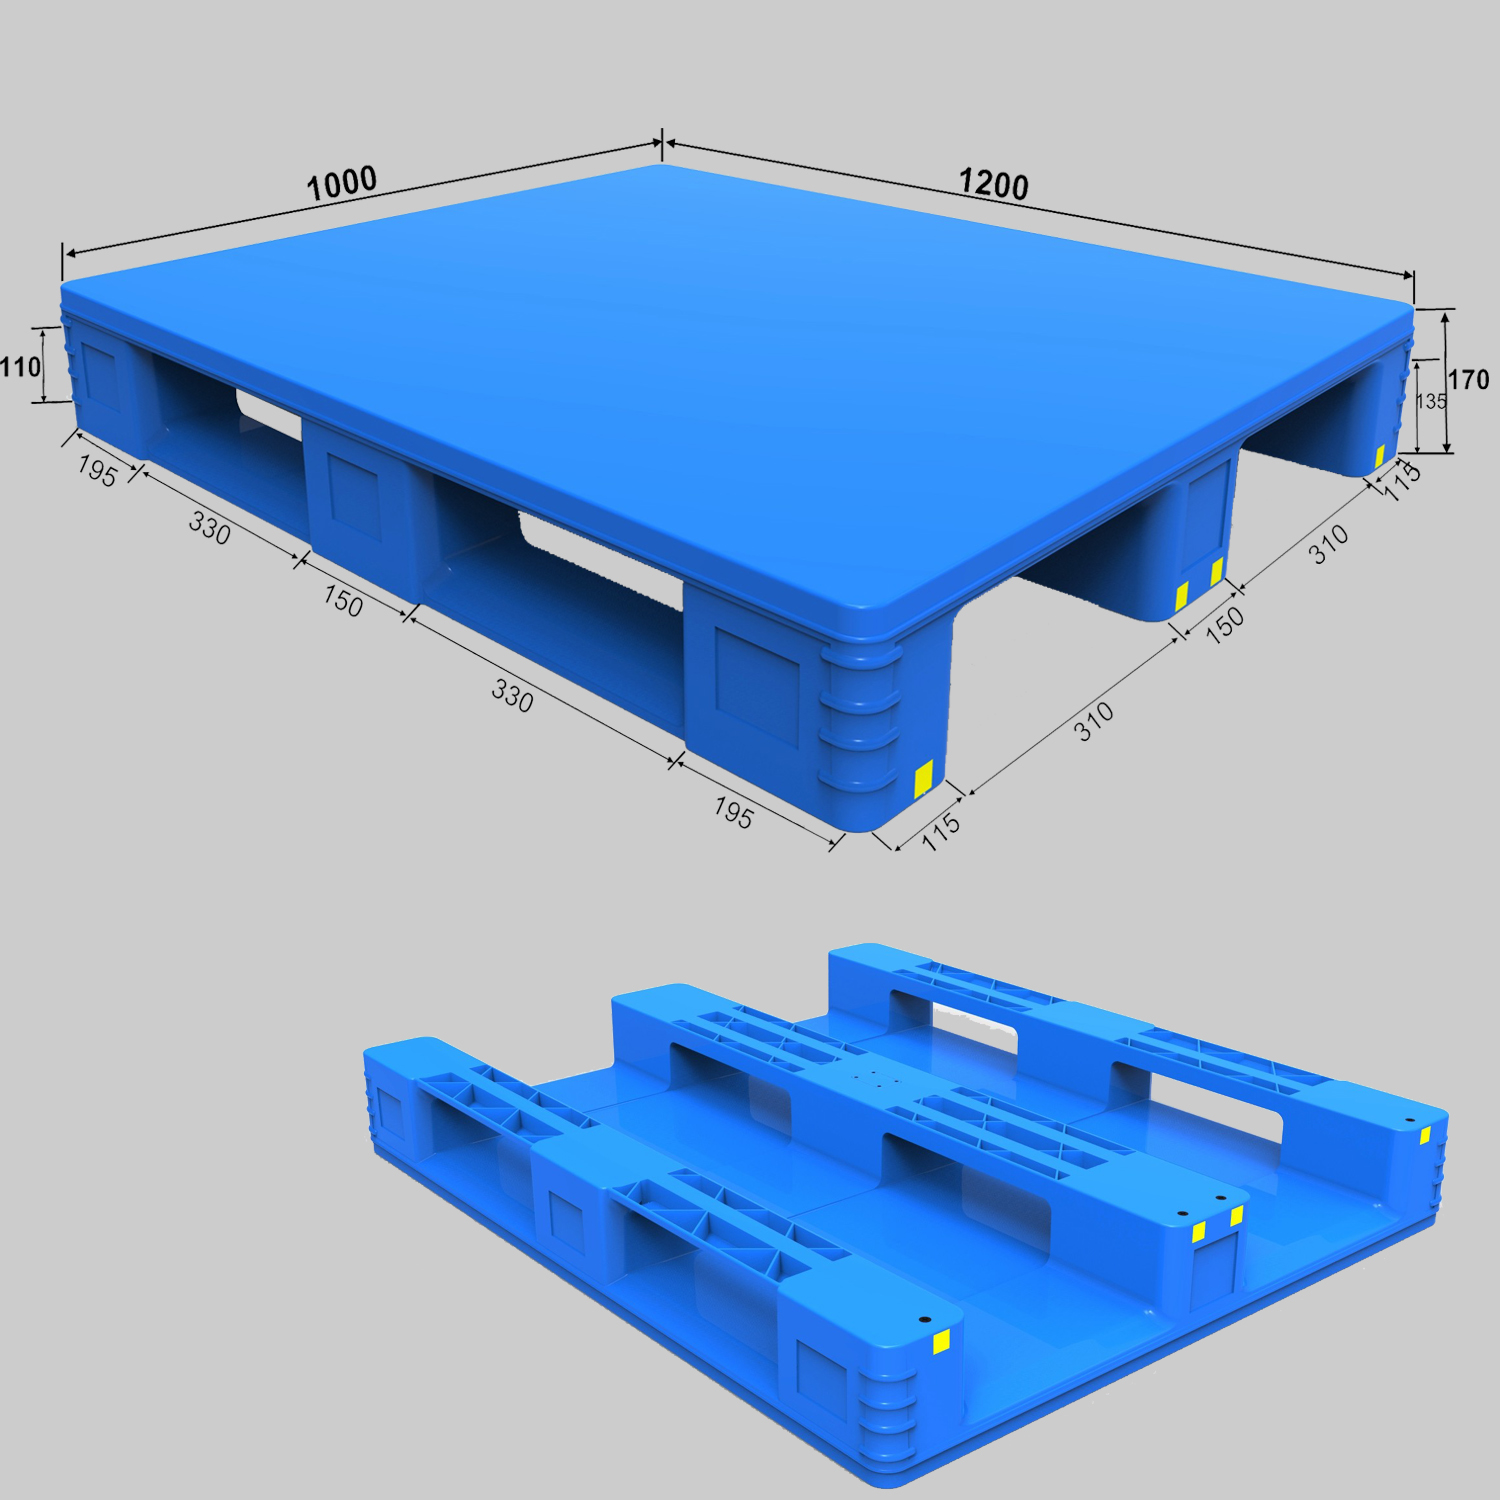 1200 x 1000 Hygienic Smooth Plastic Solid Top Rackable Pallets